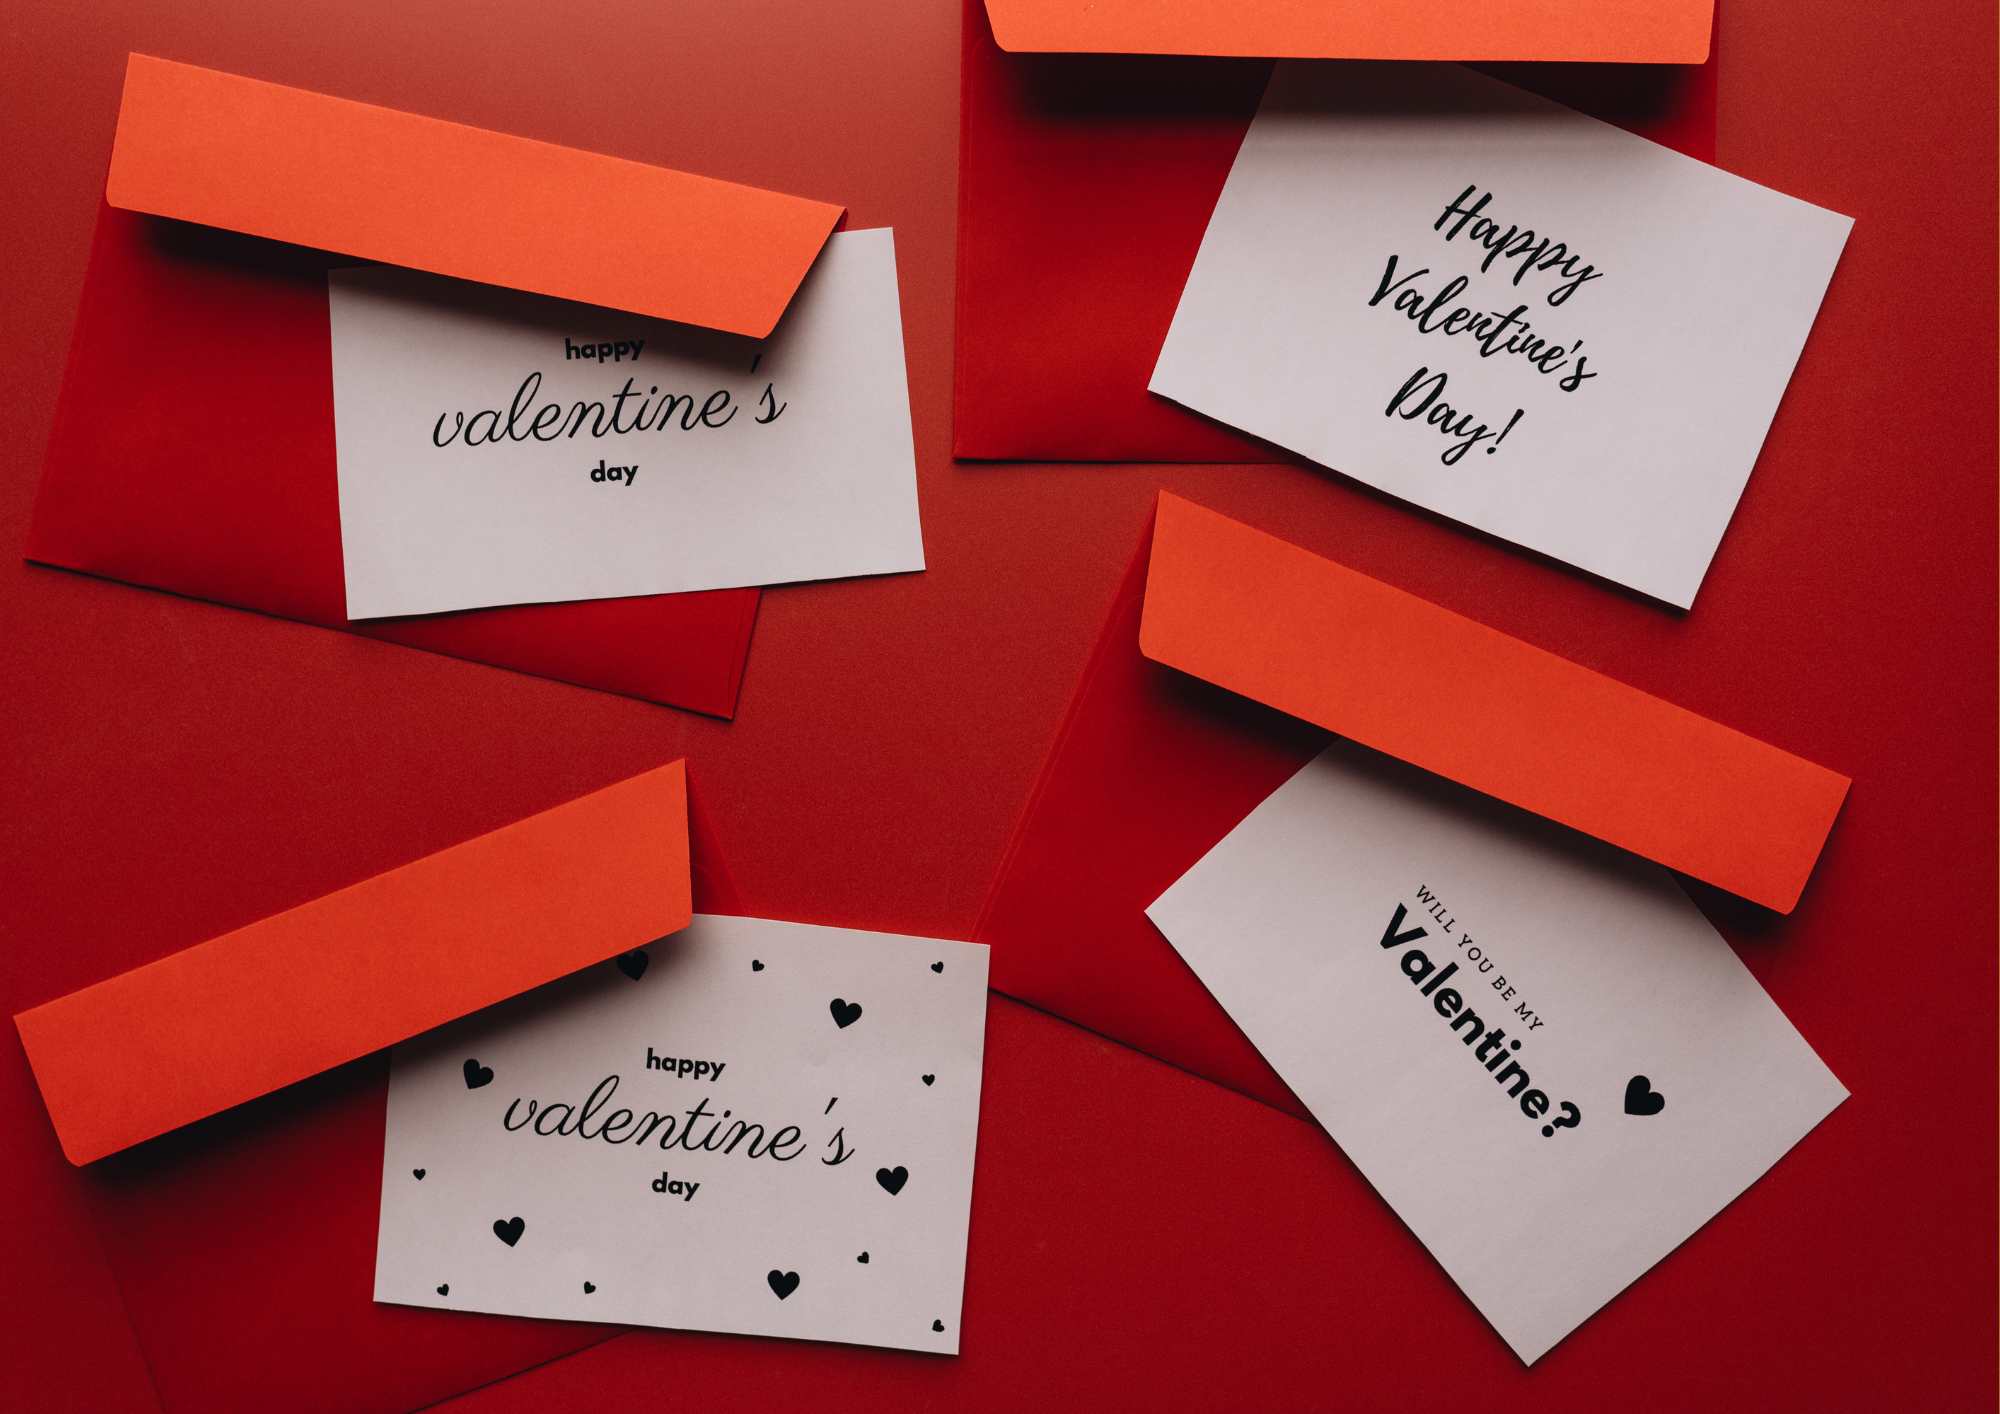 How brands can maximise sales during Valentine’s Day